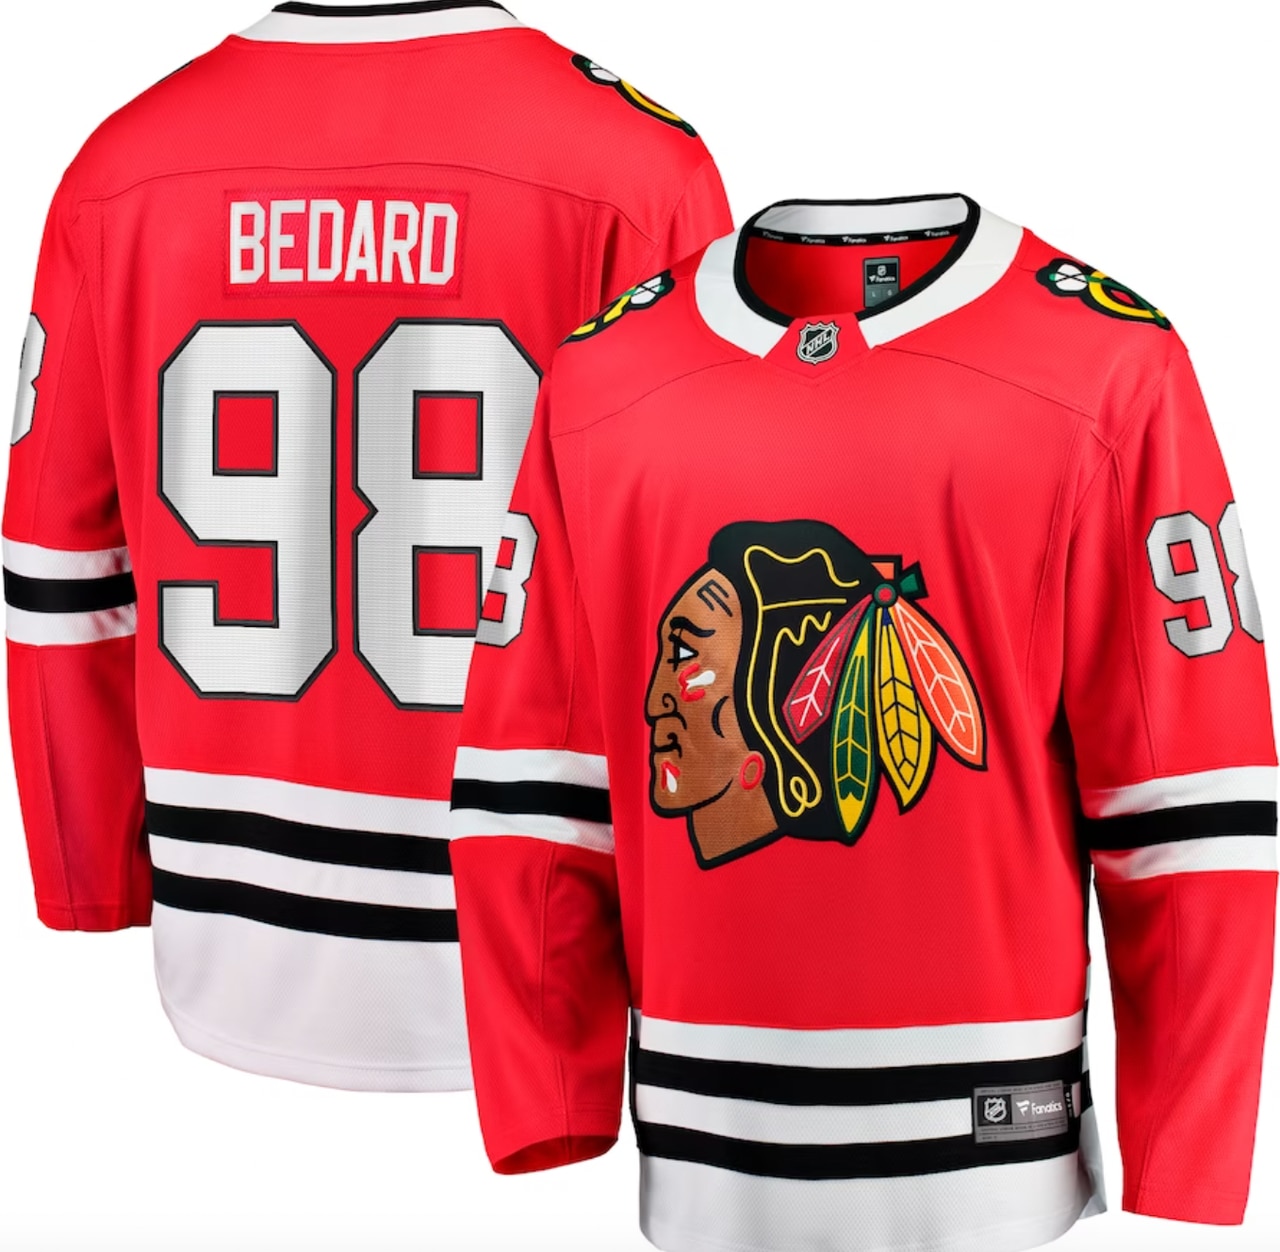 Where to buy Connor Bedard Chicago Blackhawks jersey online: How